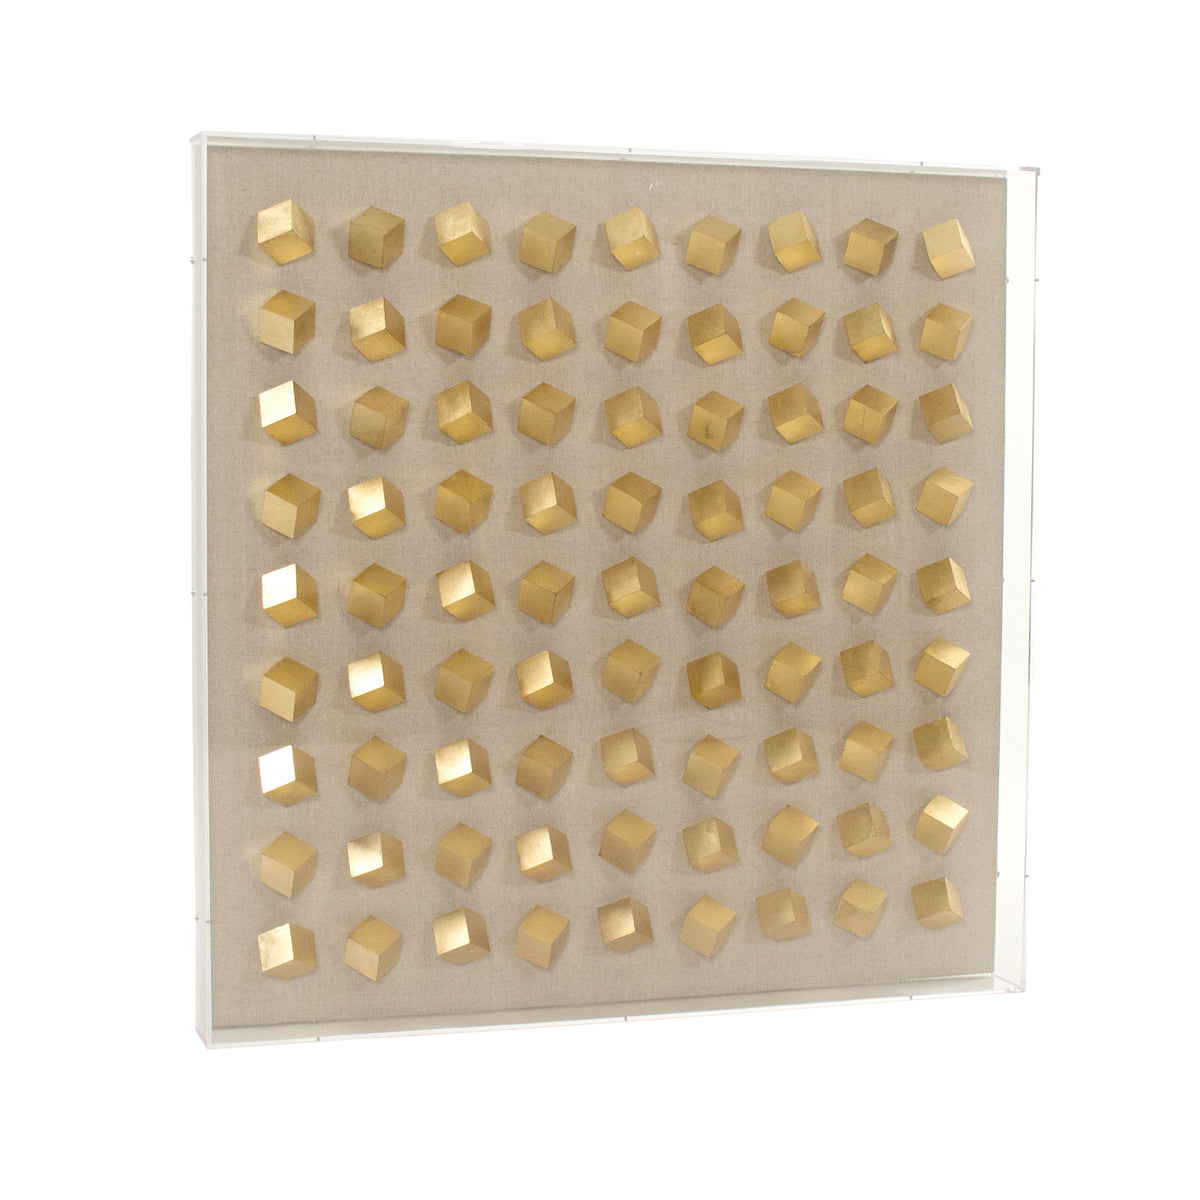 Golden Cubes in Acrylic Wall Art by Zentique